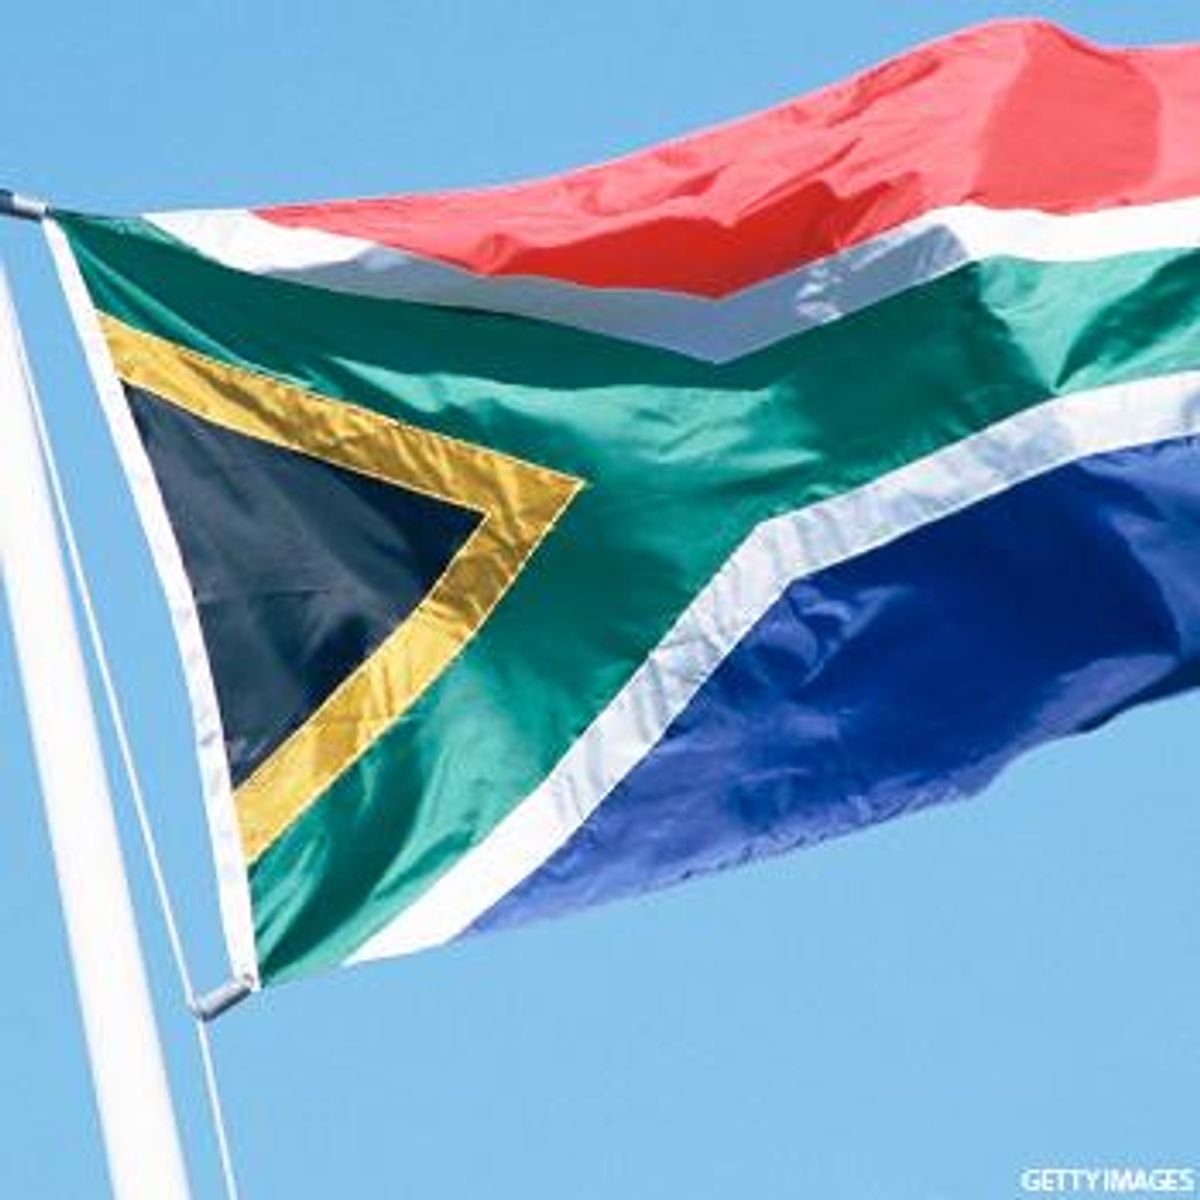 Flag_southafrica_4_0